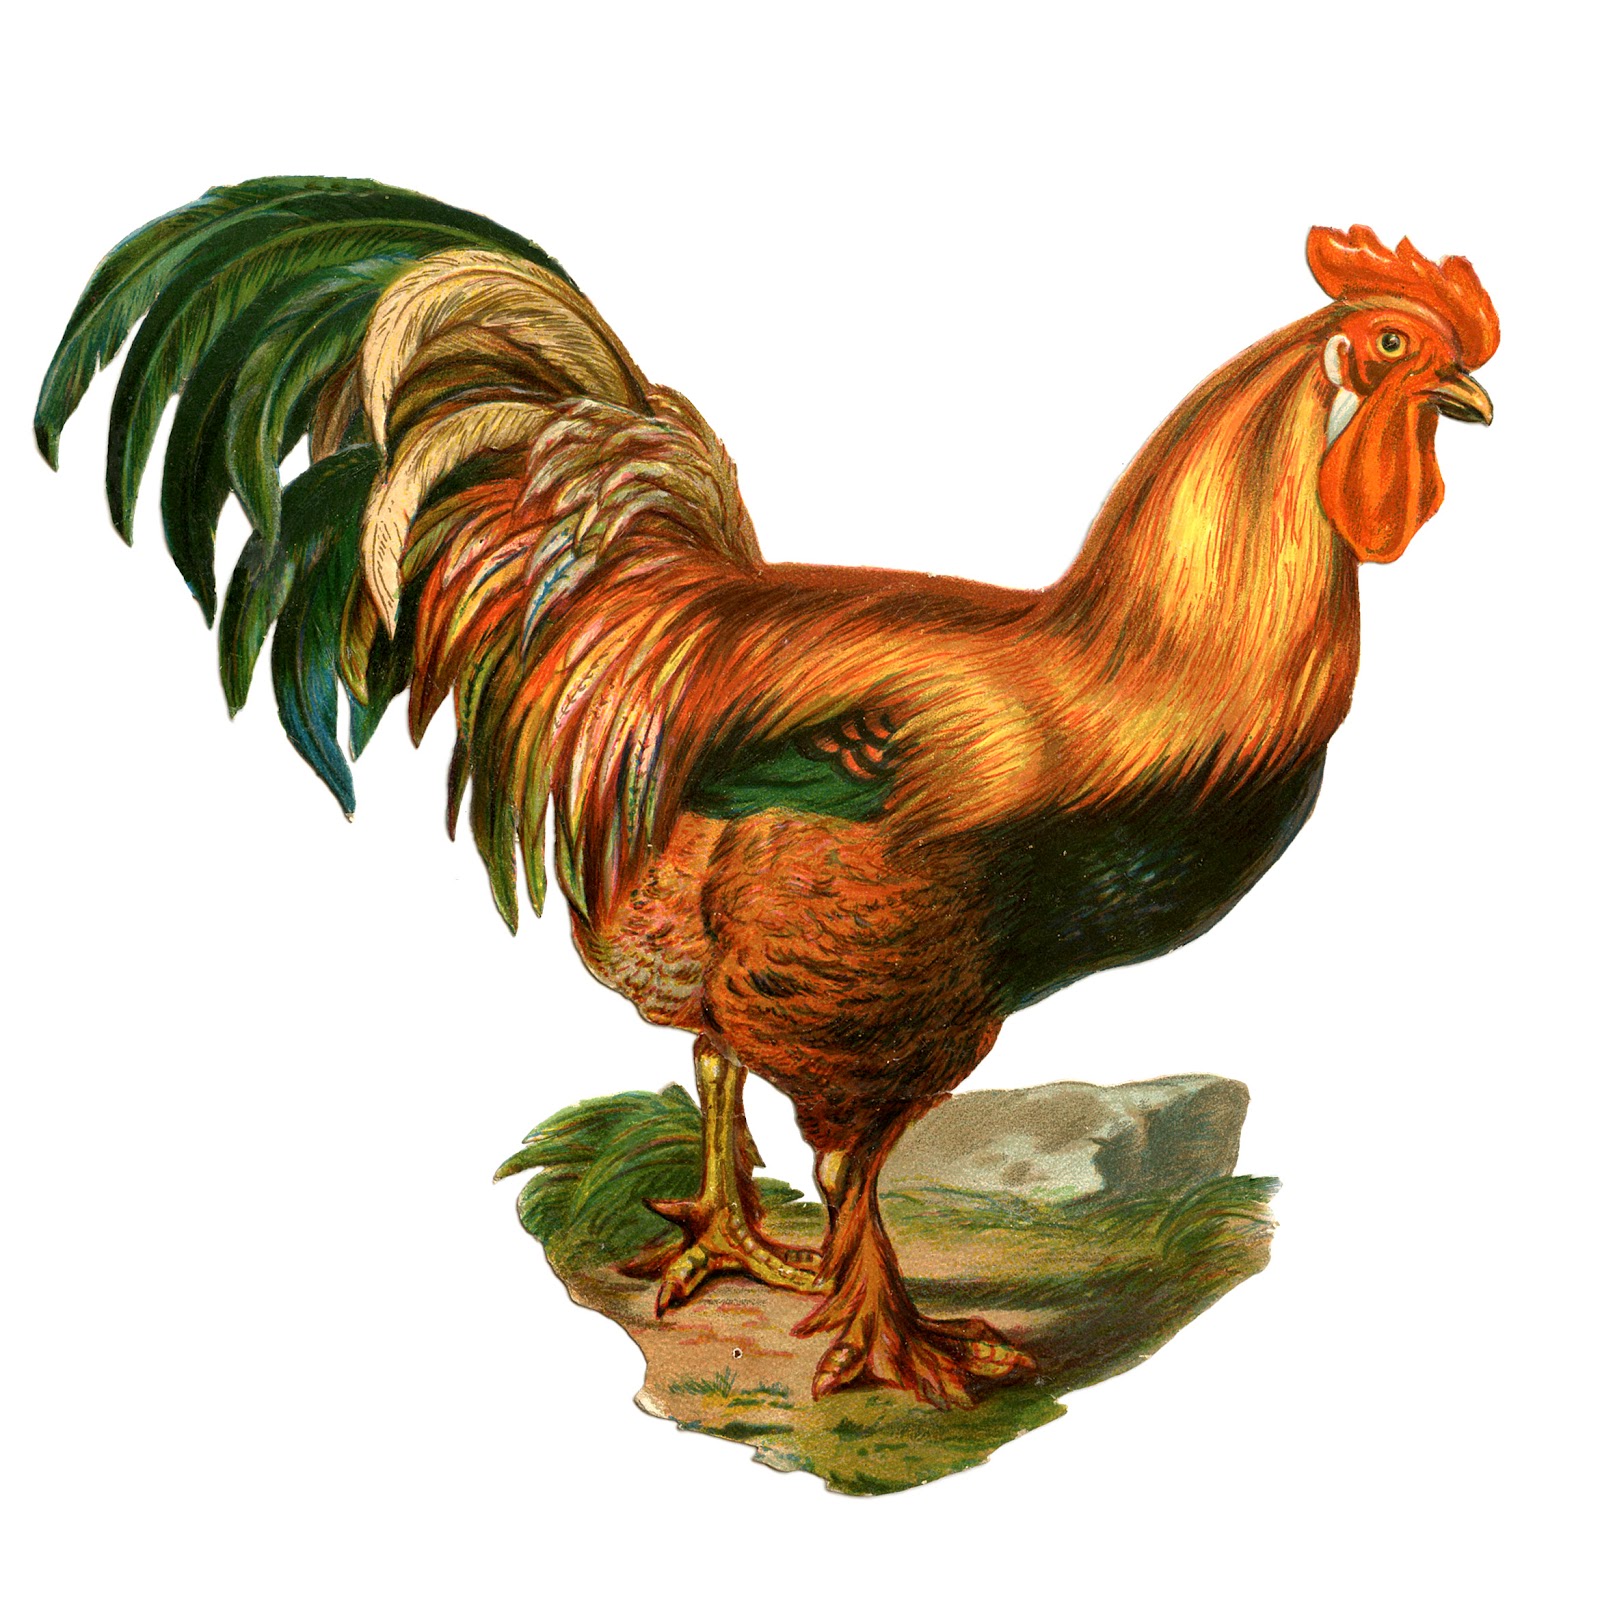 chickens clipart rooster